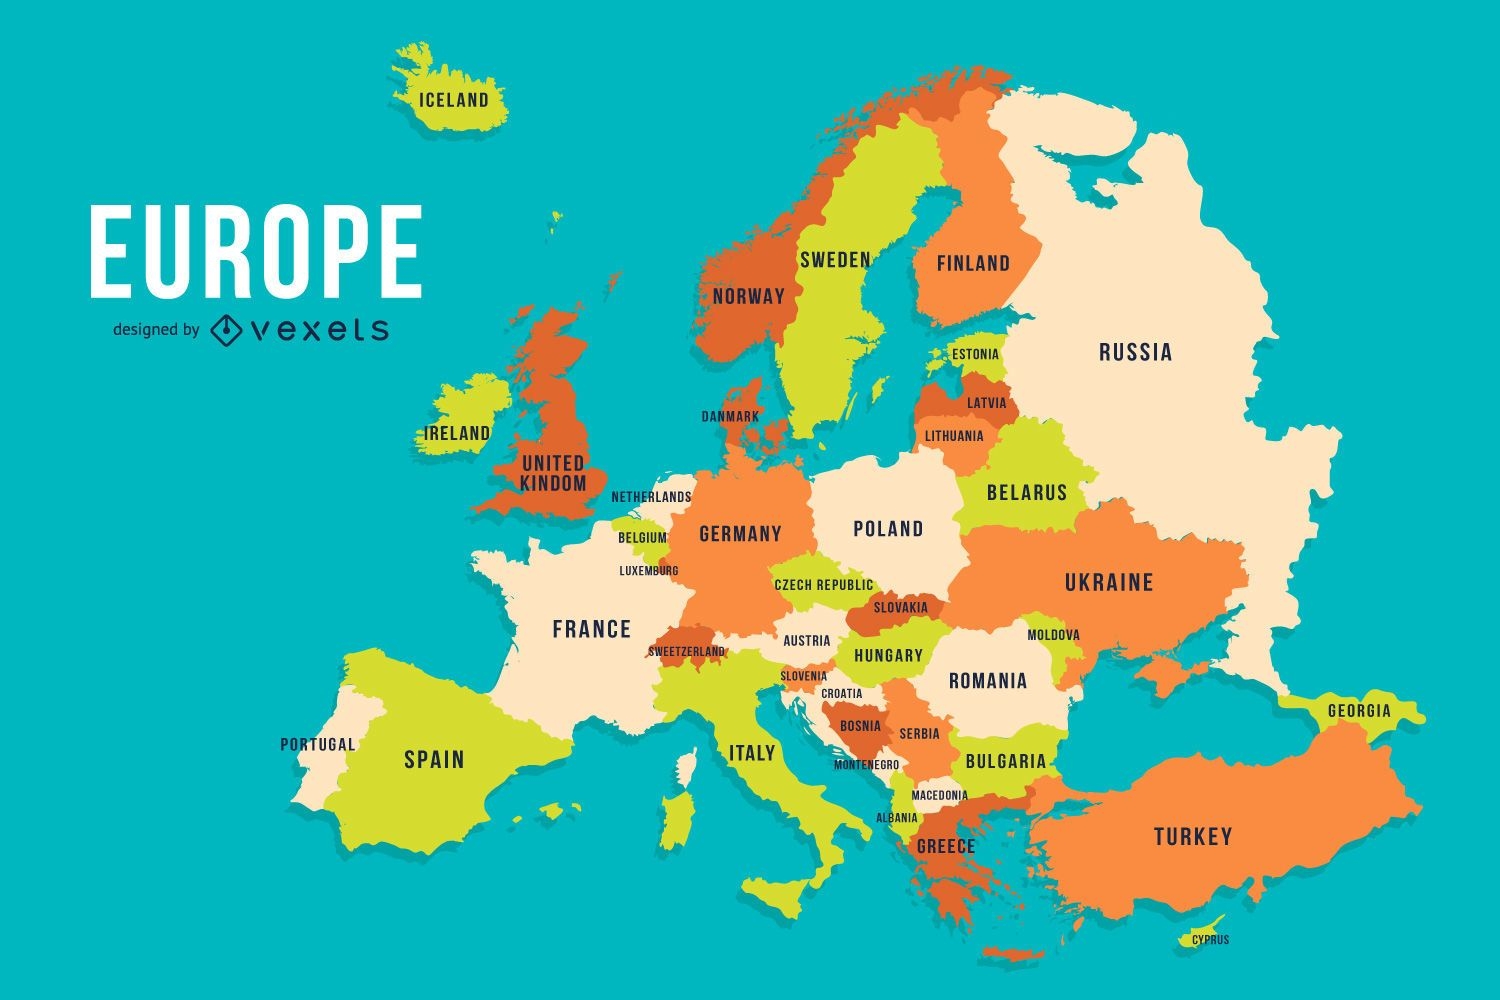 https://images.vexels.com/content/187951/preview/europe-colored-country-map-design-95ec22.png